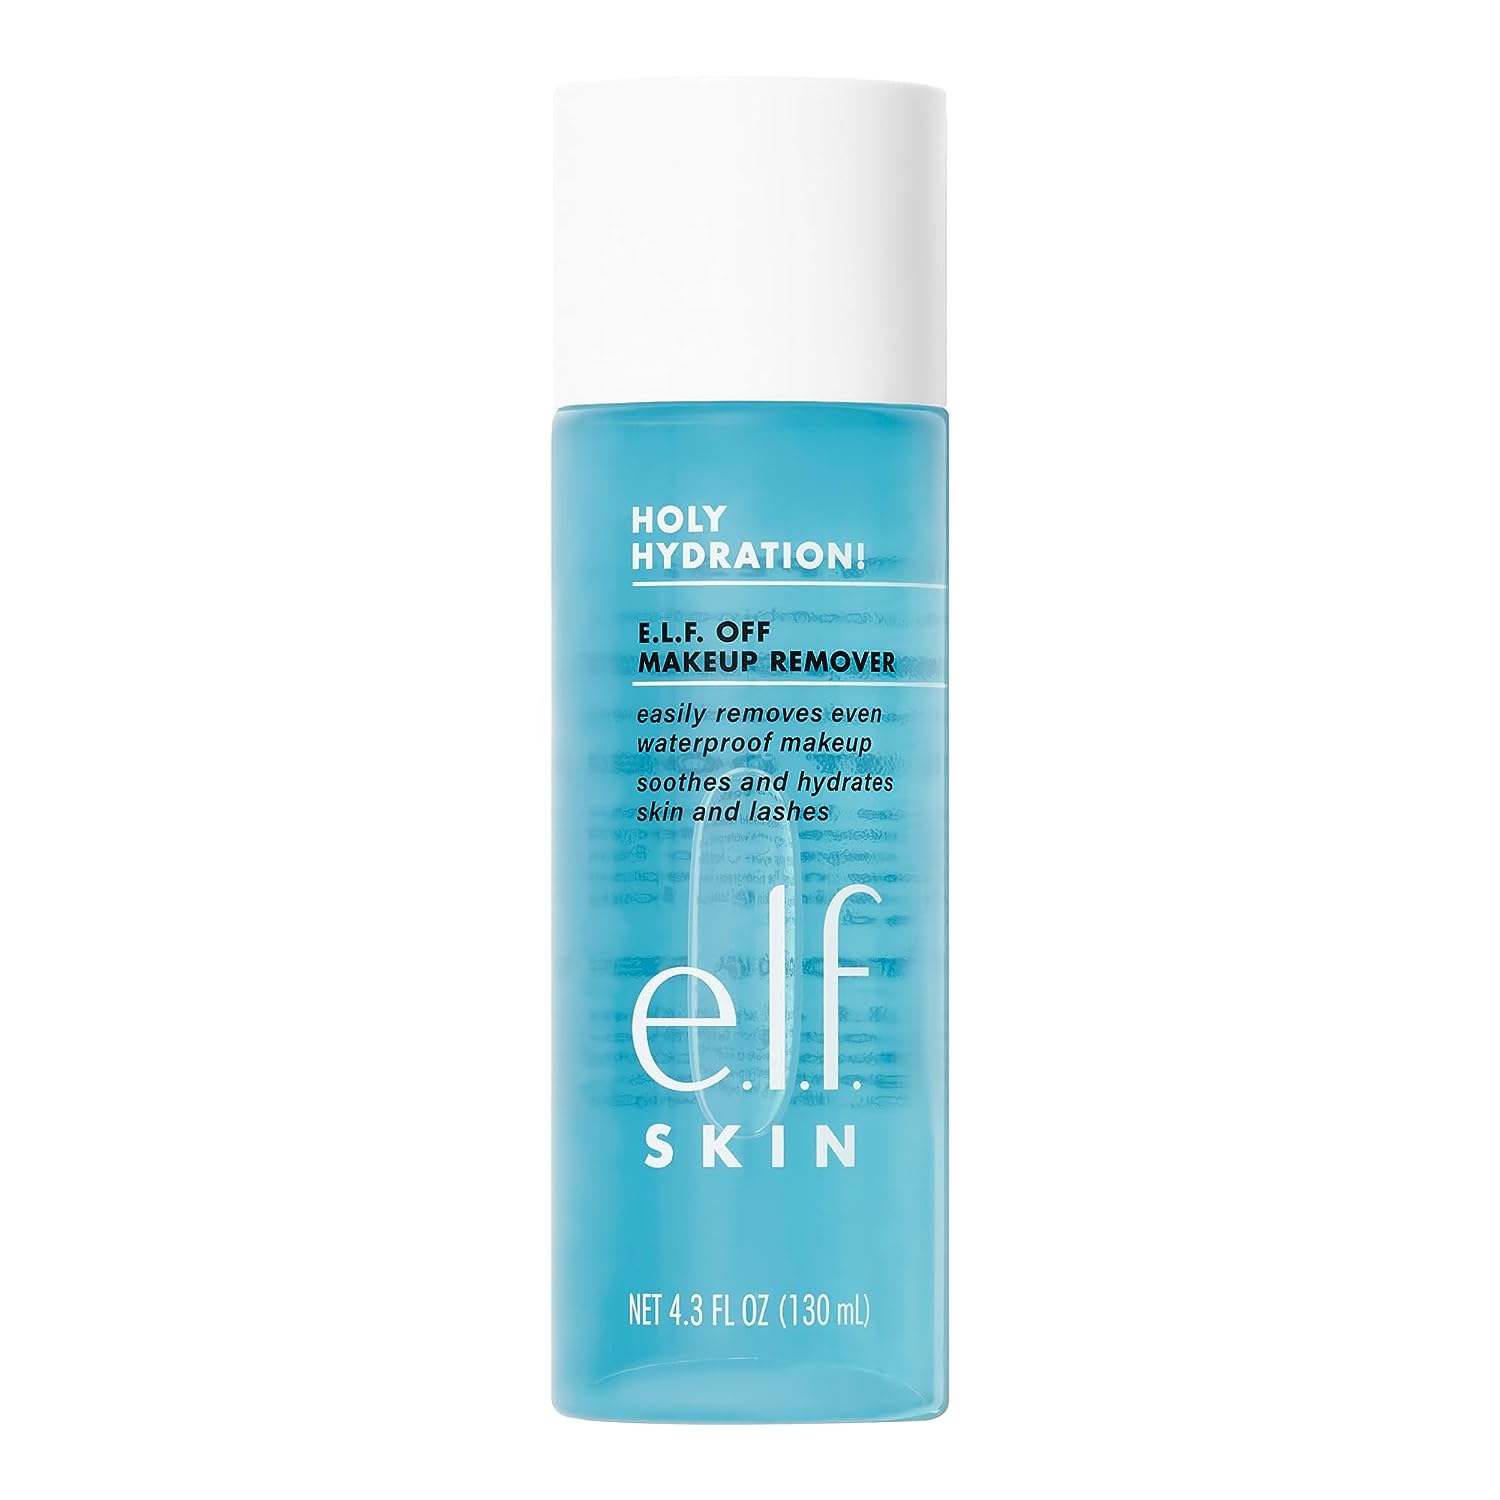 e.l.f. SKIN Holy Hydration Off Makeup Remover, Liquid Makeup Remover For Eye, Lip & Face Makeup, Gentle Formula, Vegan & Cruelty-free